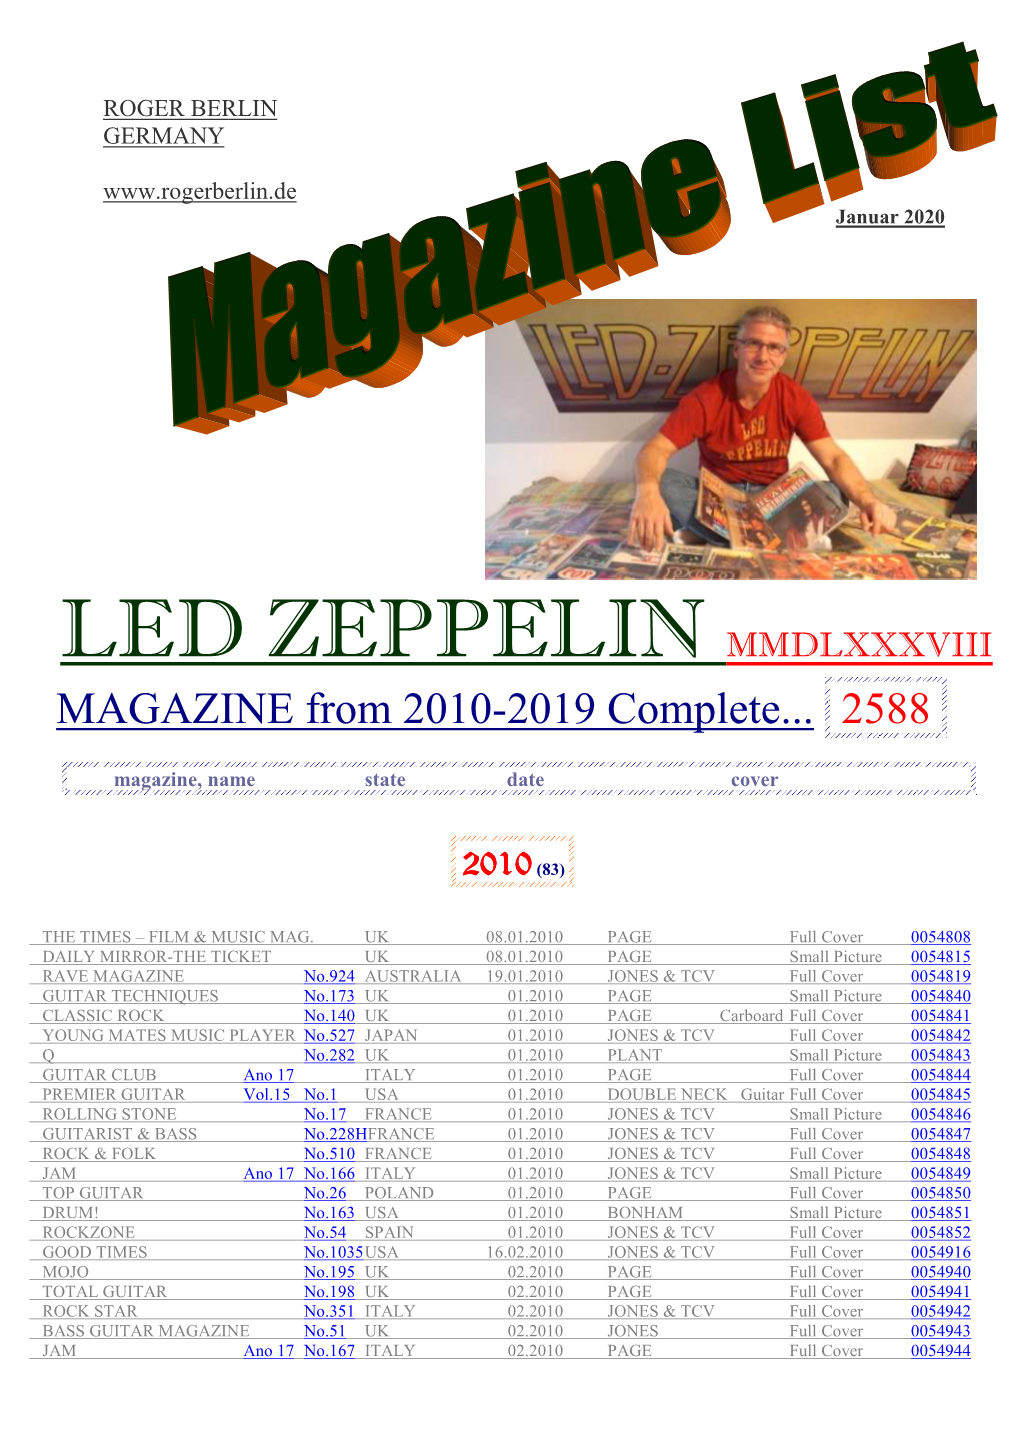 LED ZEPPELIN MMDLXXXVIII MAGAZINE from 2010-2019 Complete